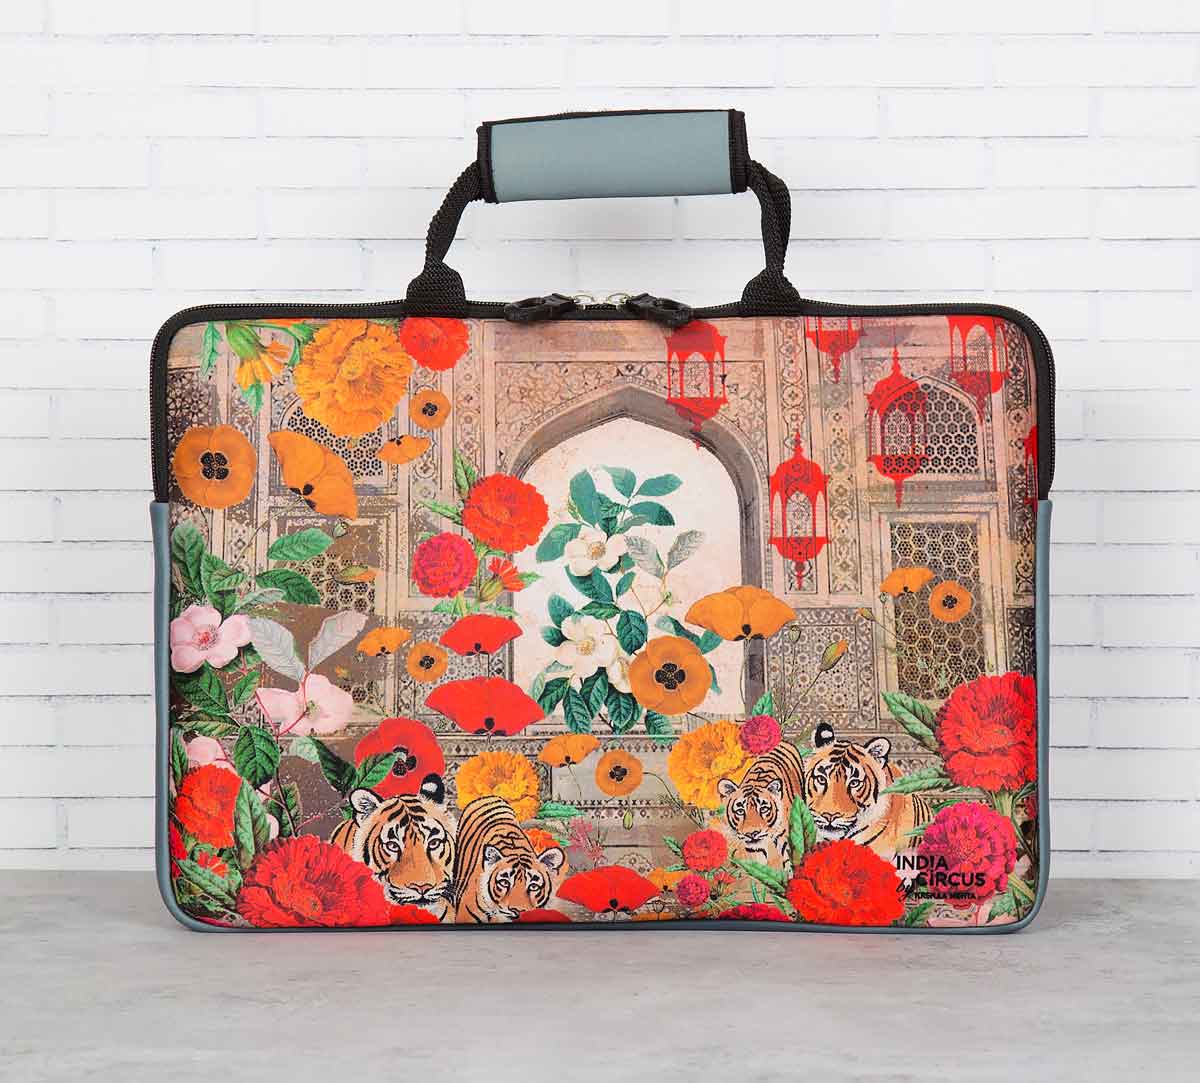 Buy laptop travel bags at low prices on India Circus